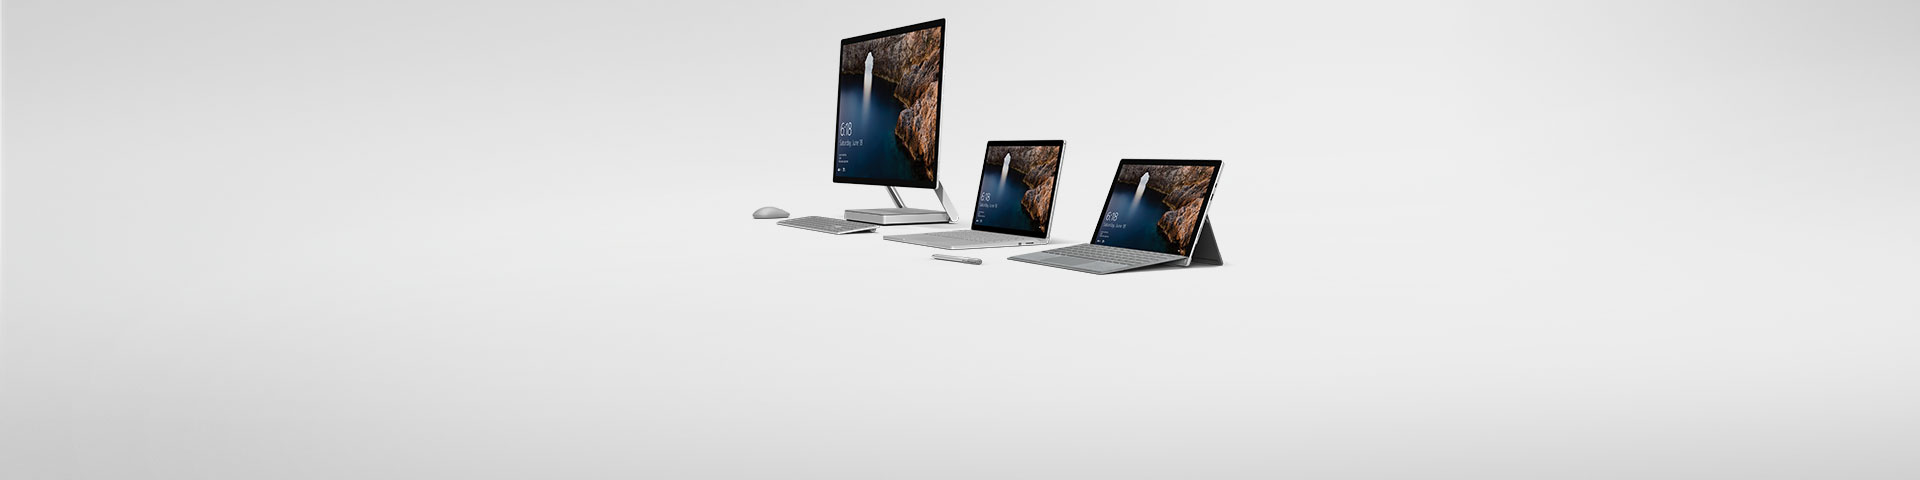 Three Surface devices